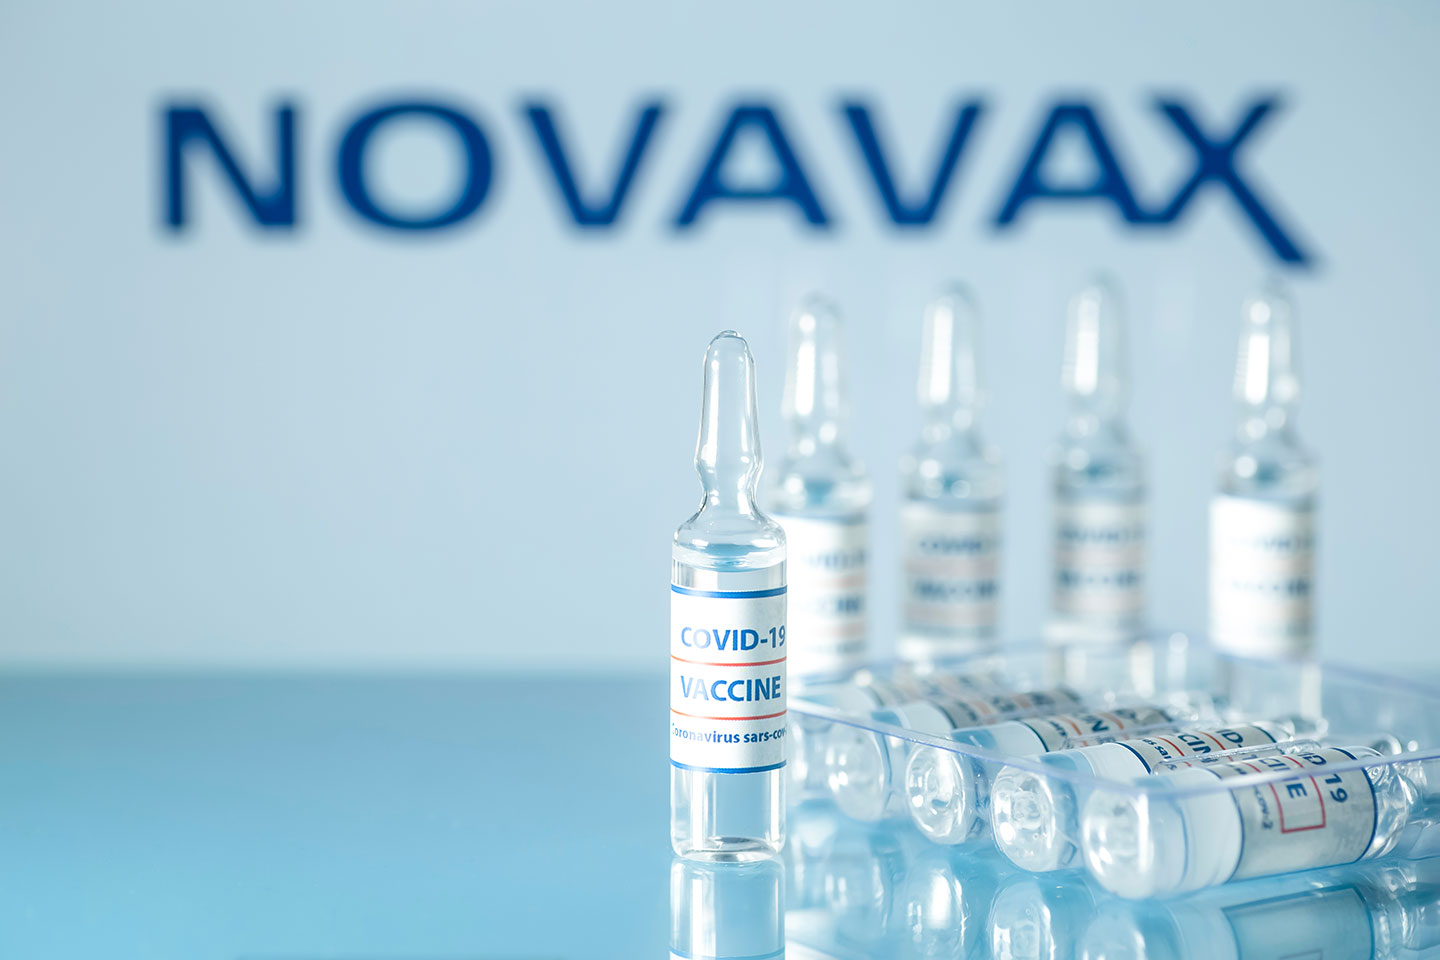 Gavi signs agreement with Novavax to secure doses on behalf of COVAX Facility